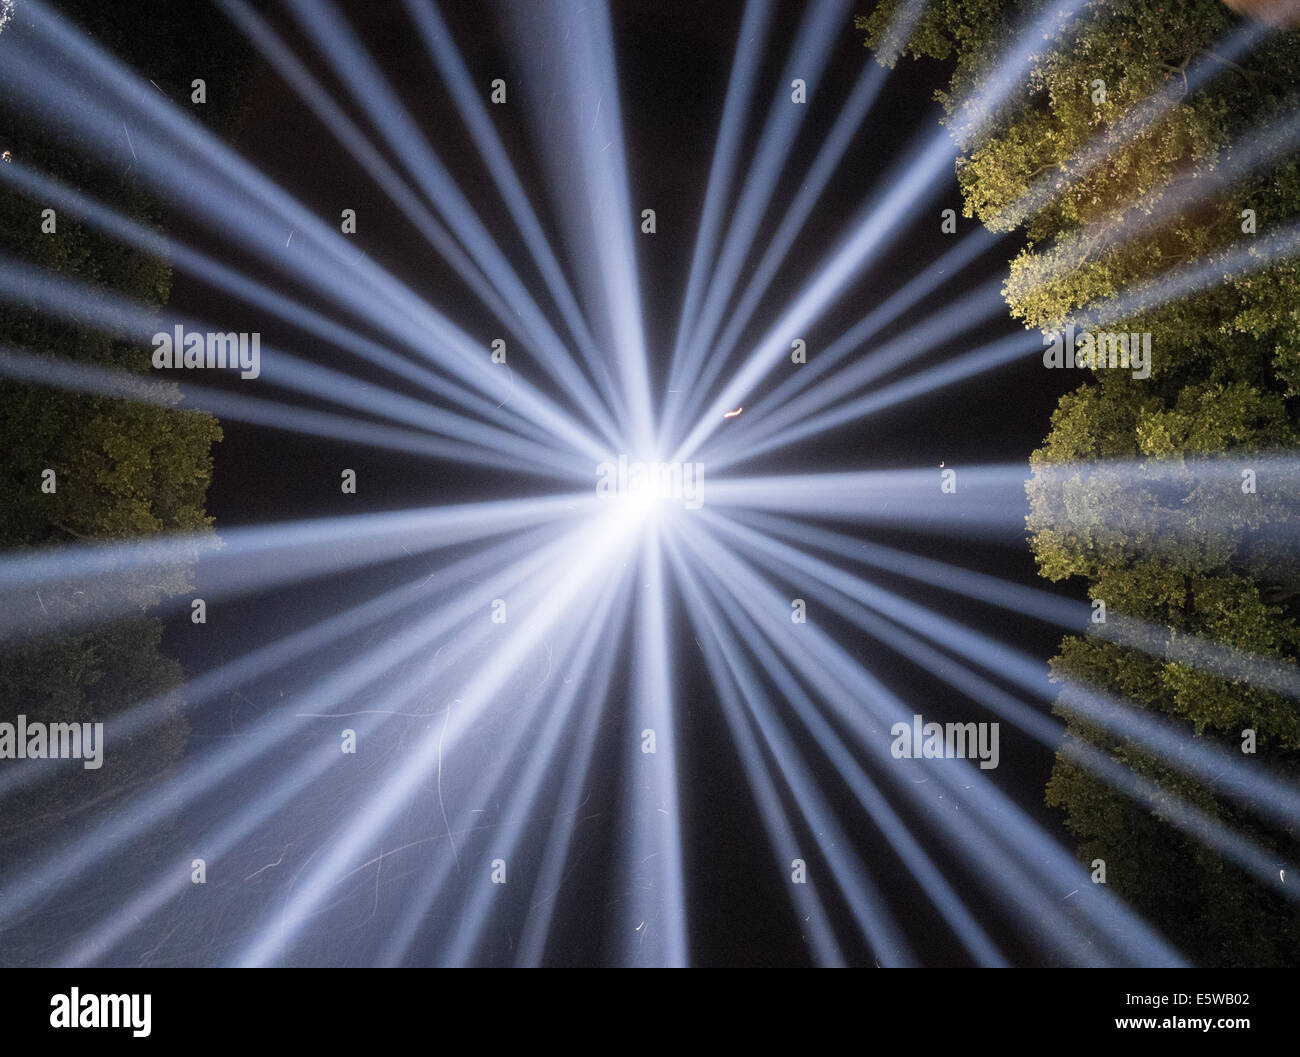 LONDON UK, 6th August 2014. Taken with a fisheye lens in the centre of the Spectra art installation in Westminster's Victoria Tower Gardens, this photo shows the individual beams of light merging to a single column. Also visible are many moths and other bugs brightly illuminated by the powerful lights. Spectra commemorates the centenary of Britain's involvement in the First World War. Credit:  Steve Bright/Alamy Live News Stock Photo